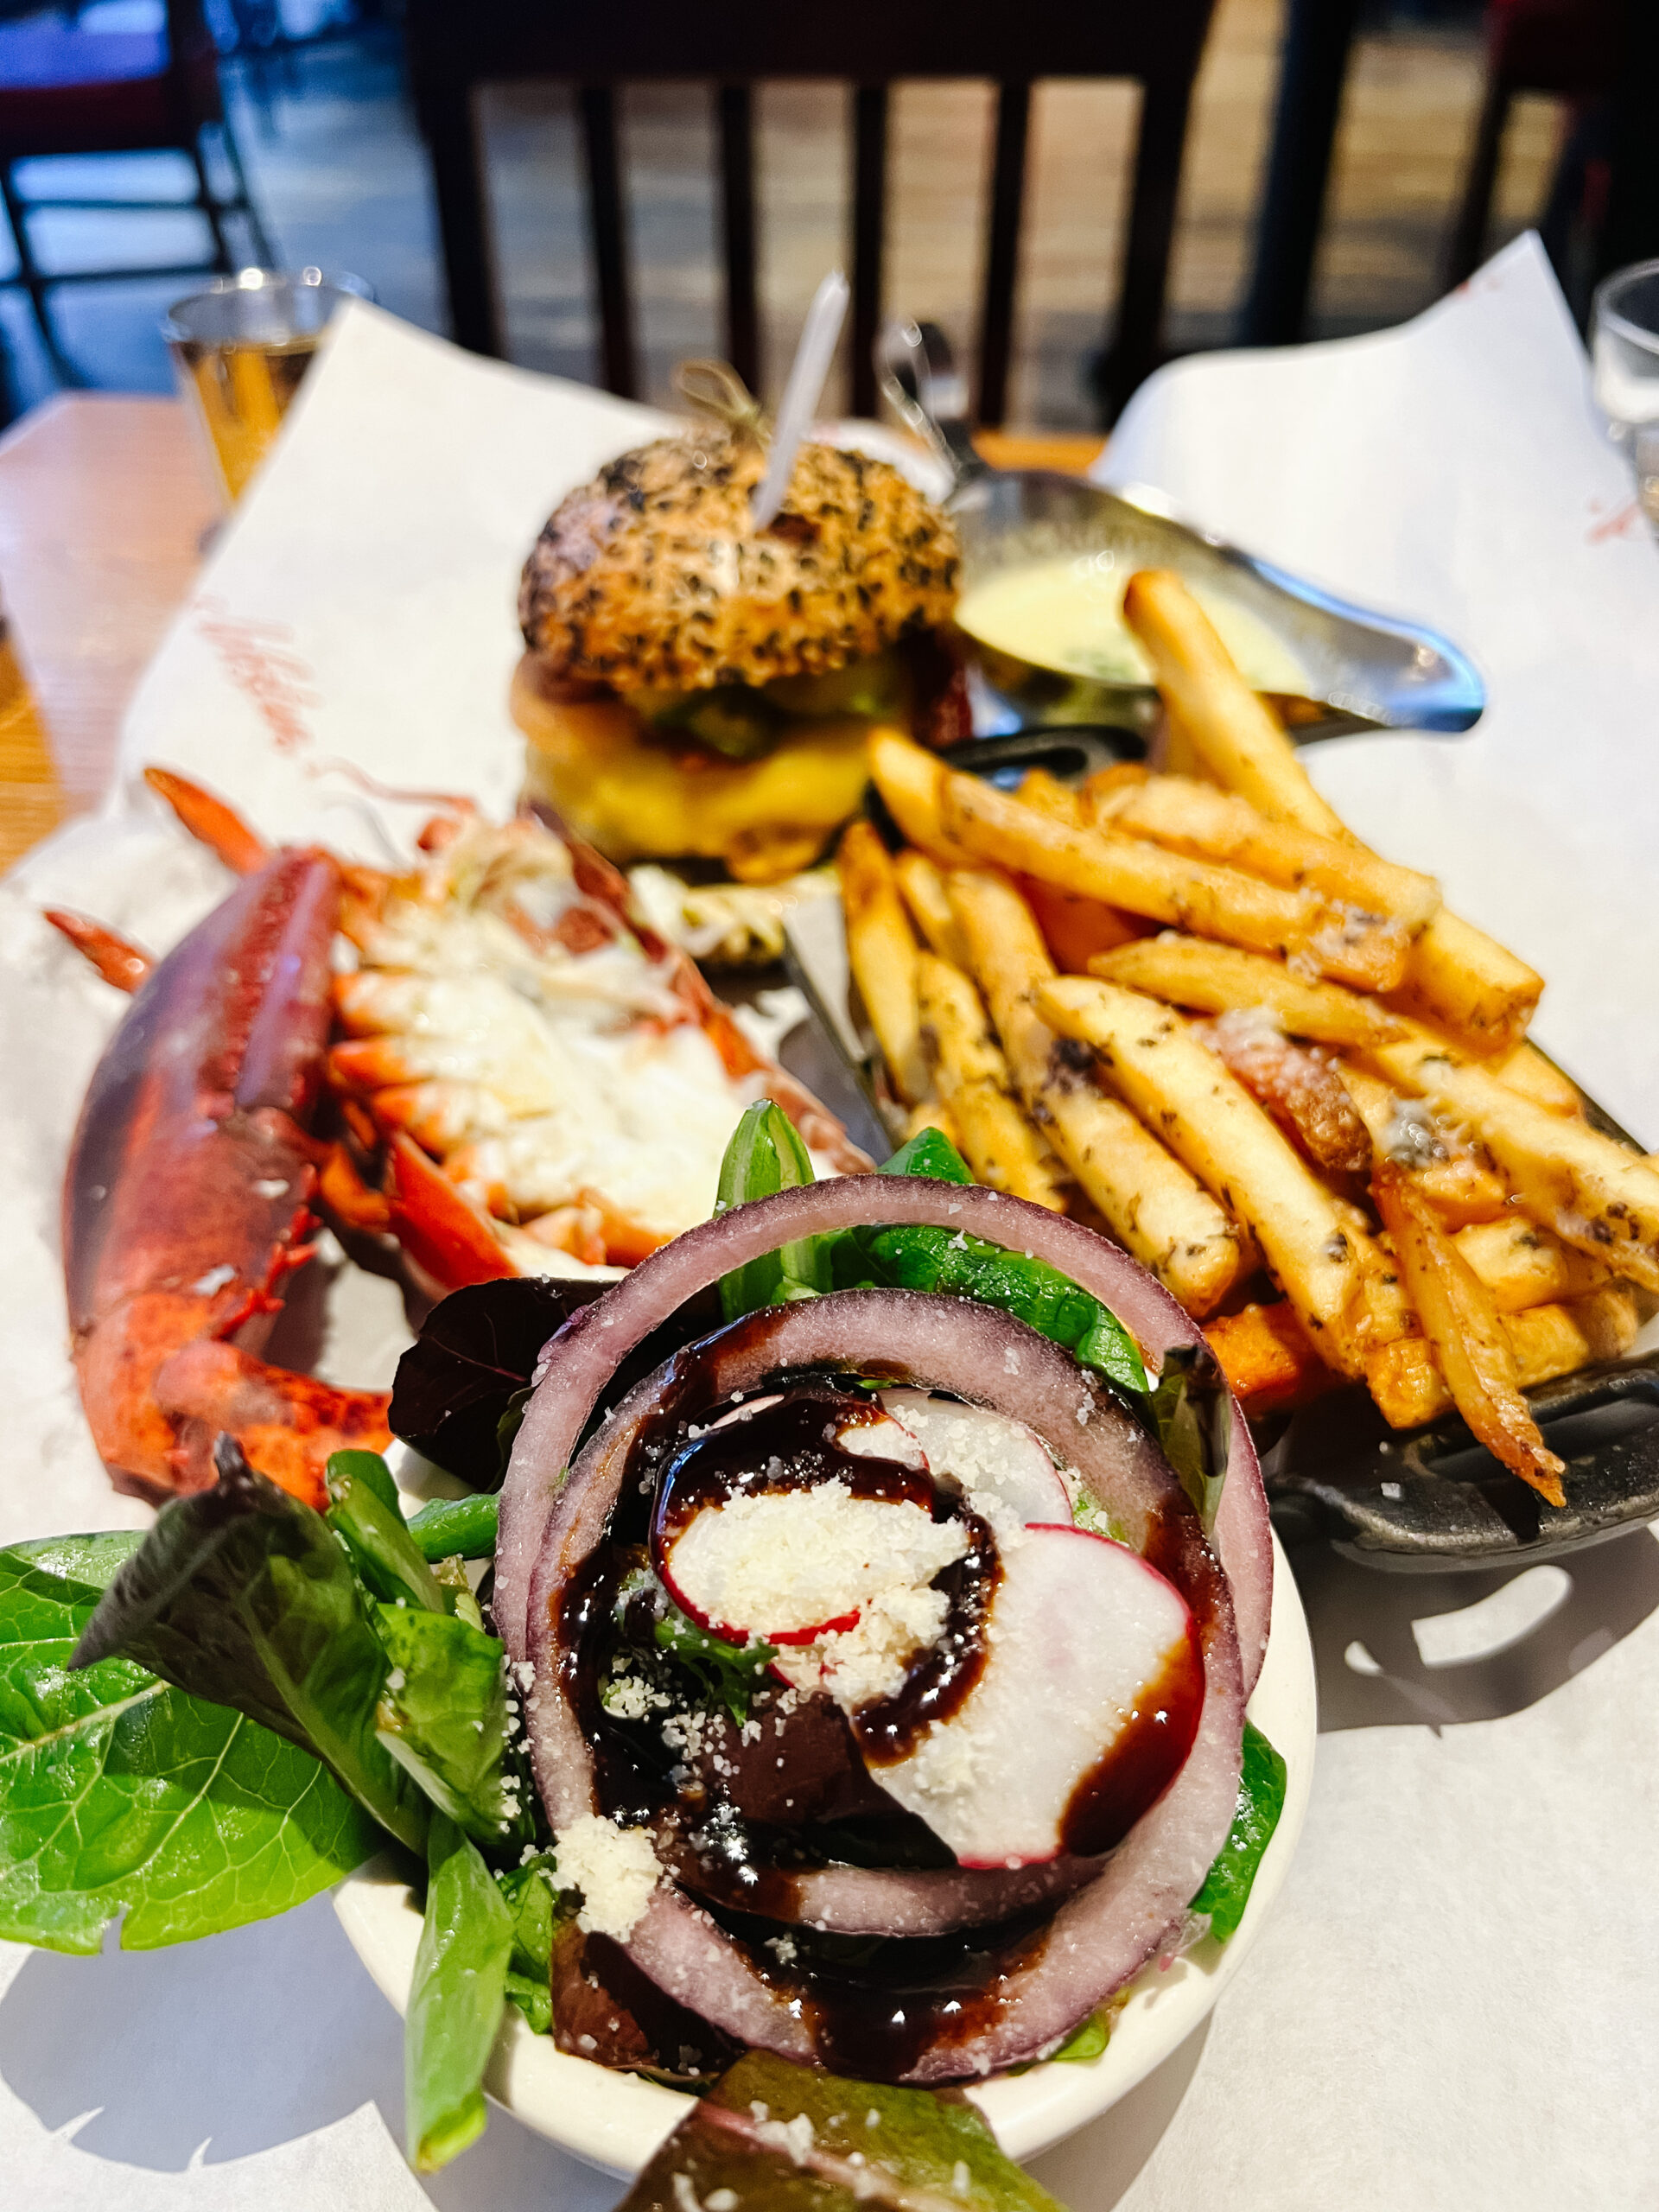 Lobster tail, fries, salad, and burger from Burger and Lobster in New York City.